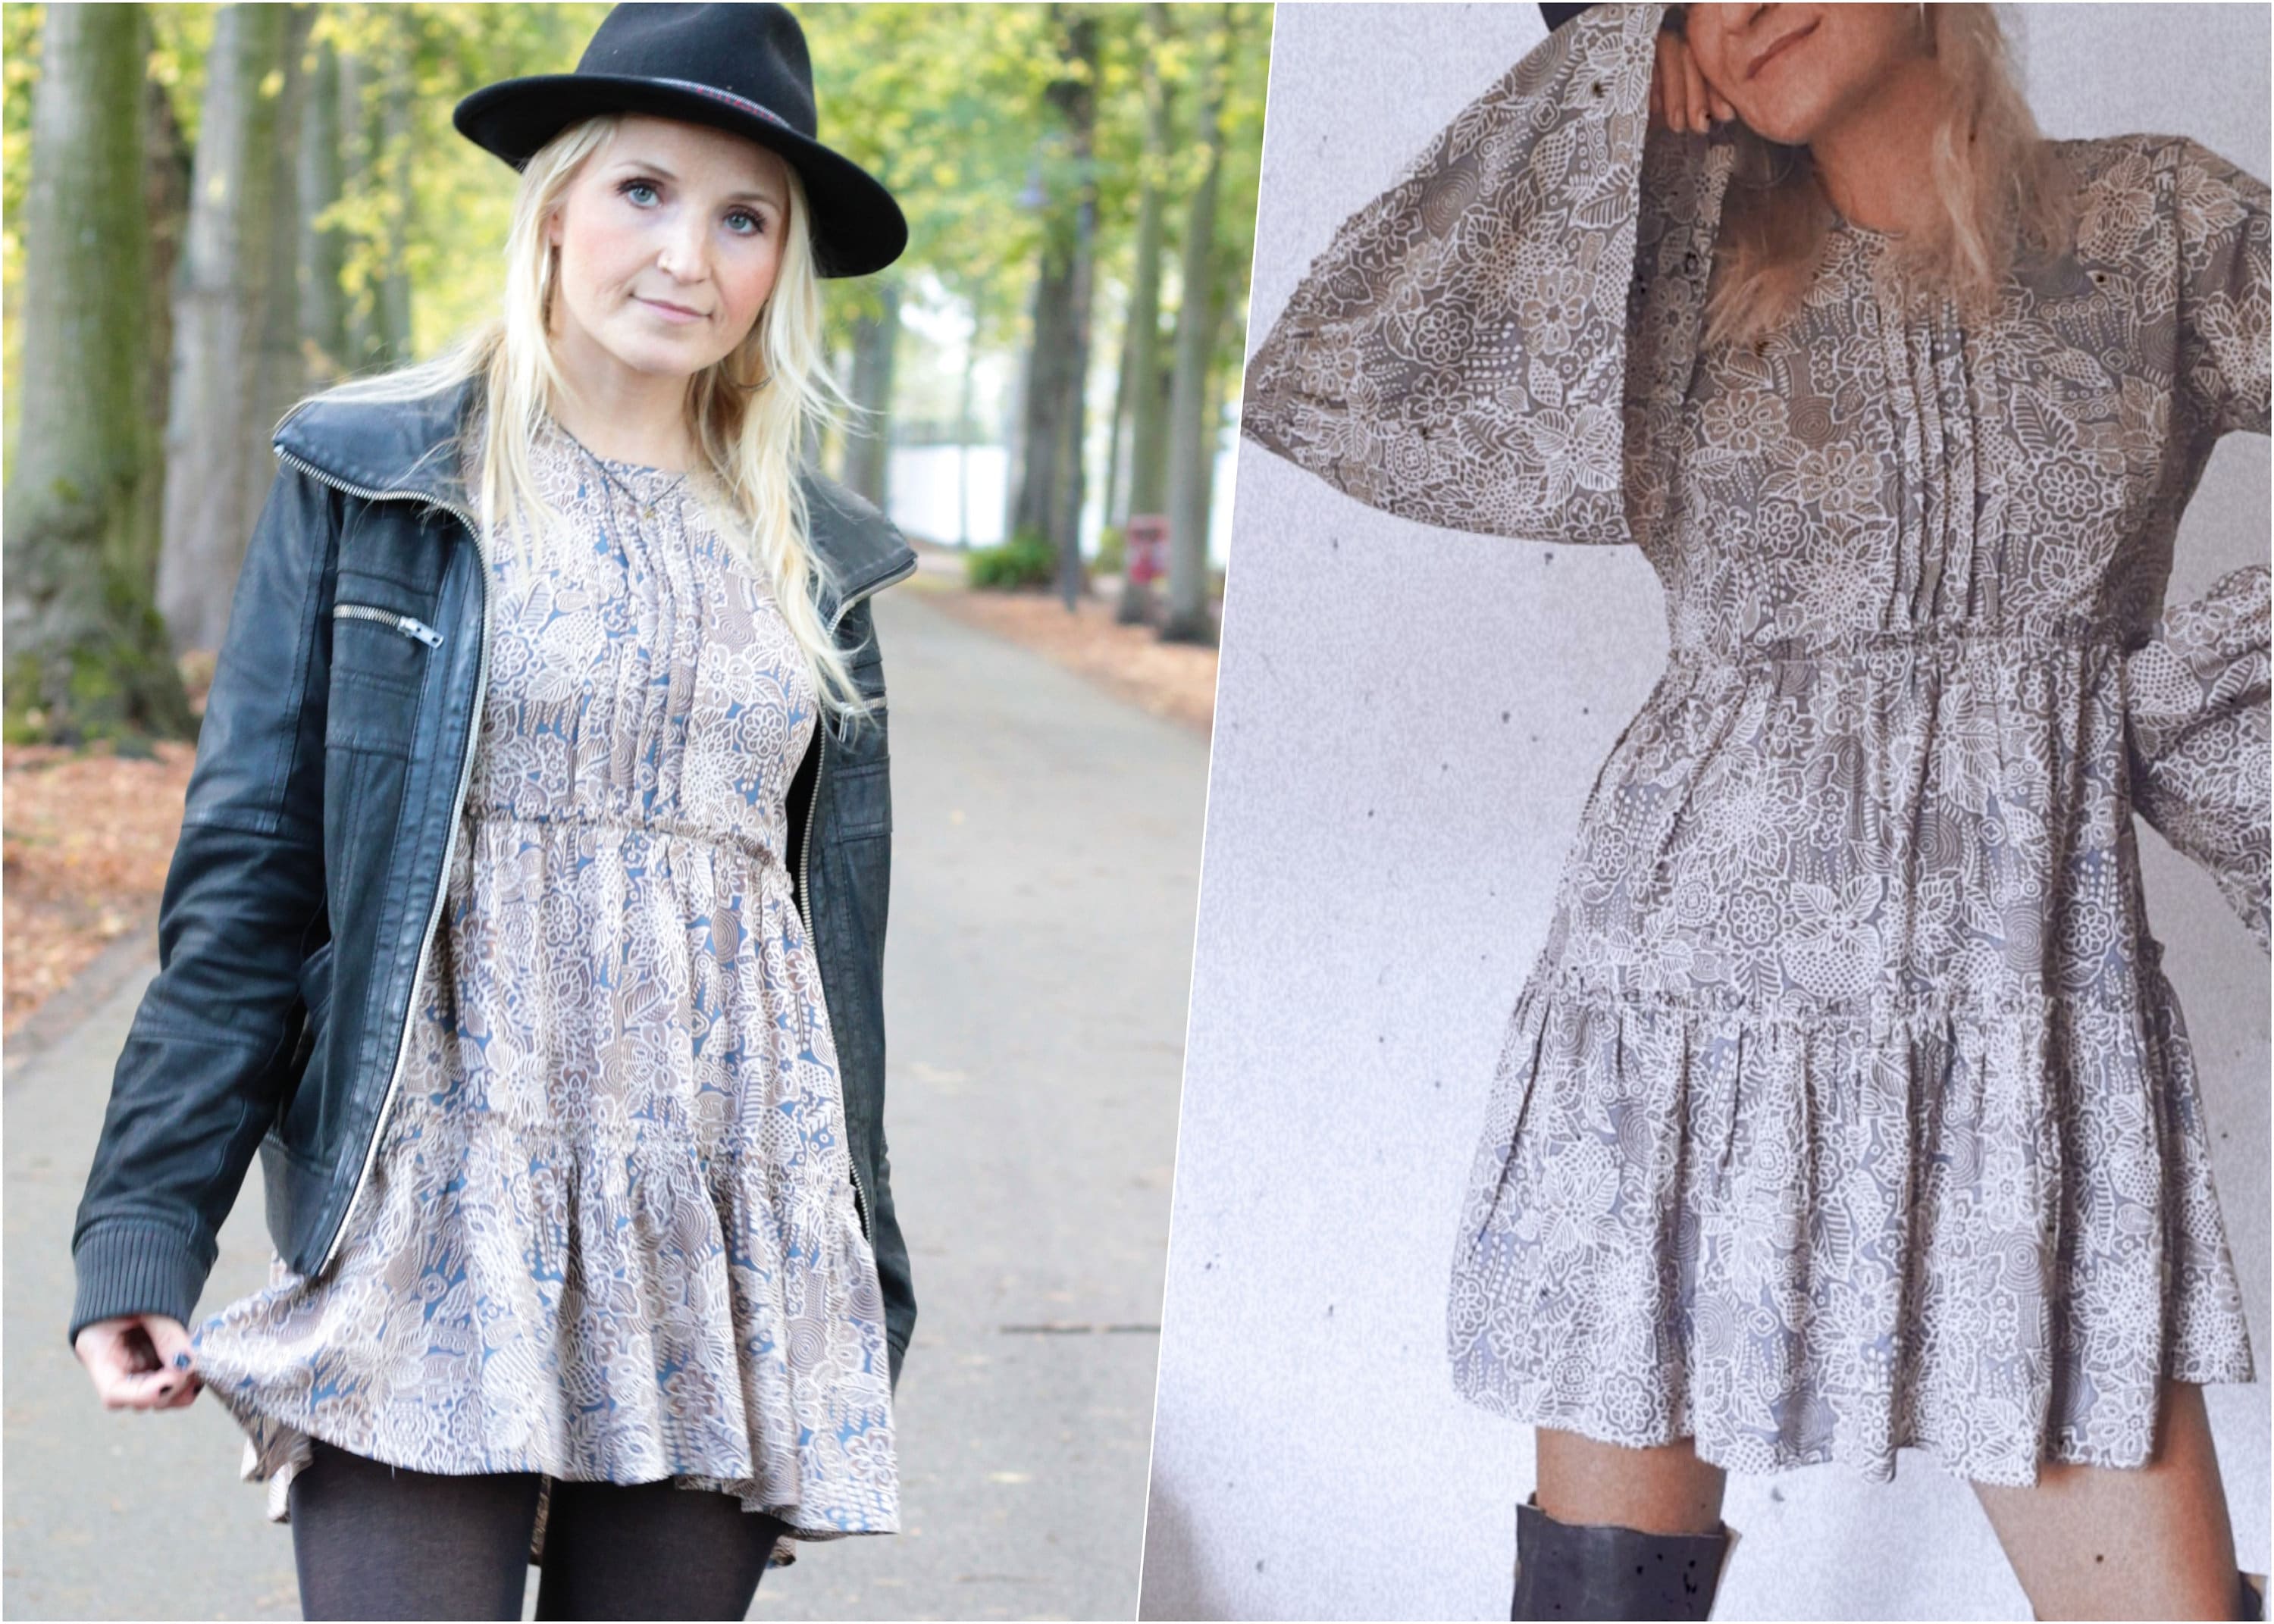 Boho tunic dress with trumpet sleeves and deep slit back - Weltentänzer